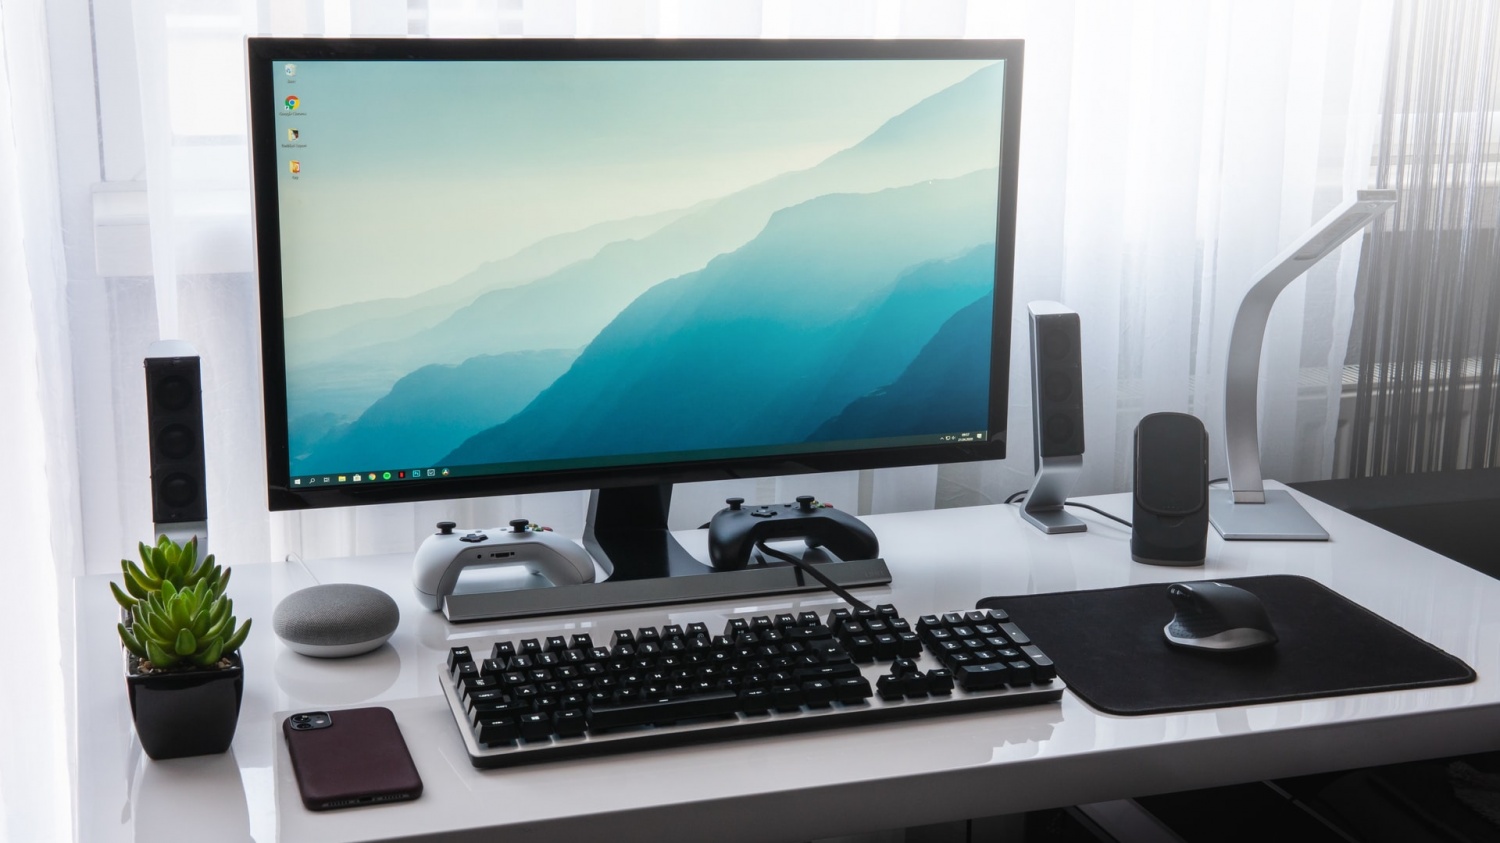 Best Portable Computer Monitors to Use | Here's What You'll Love About Them